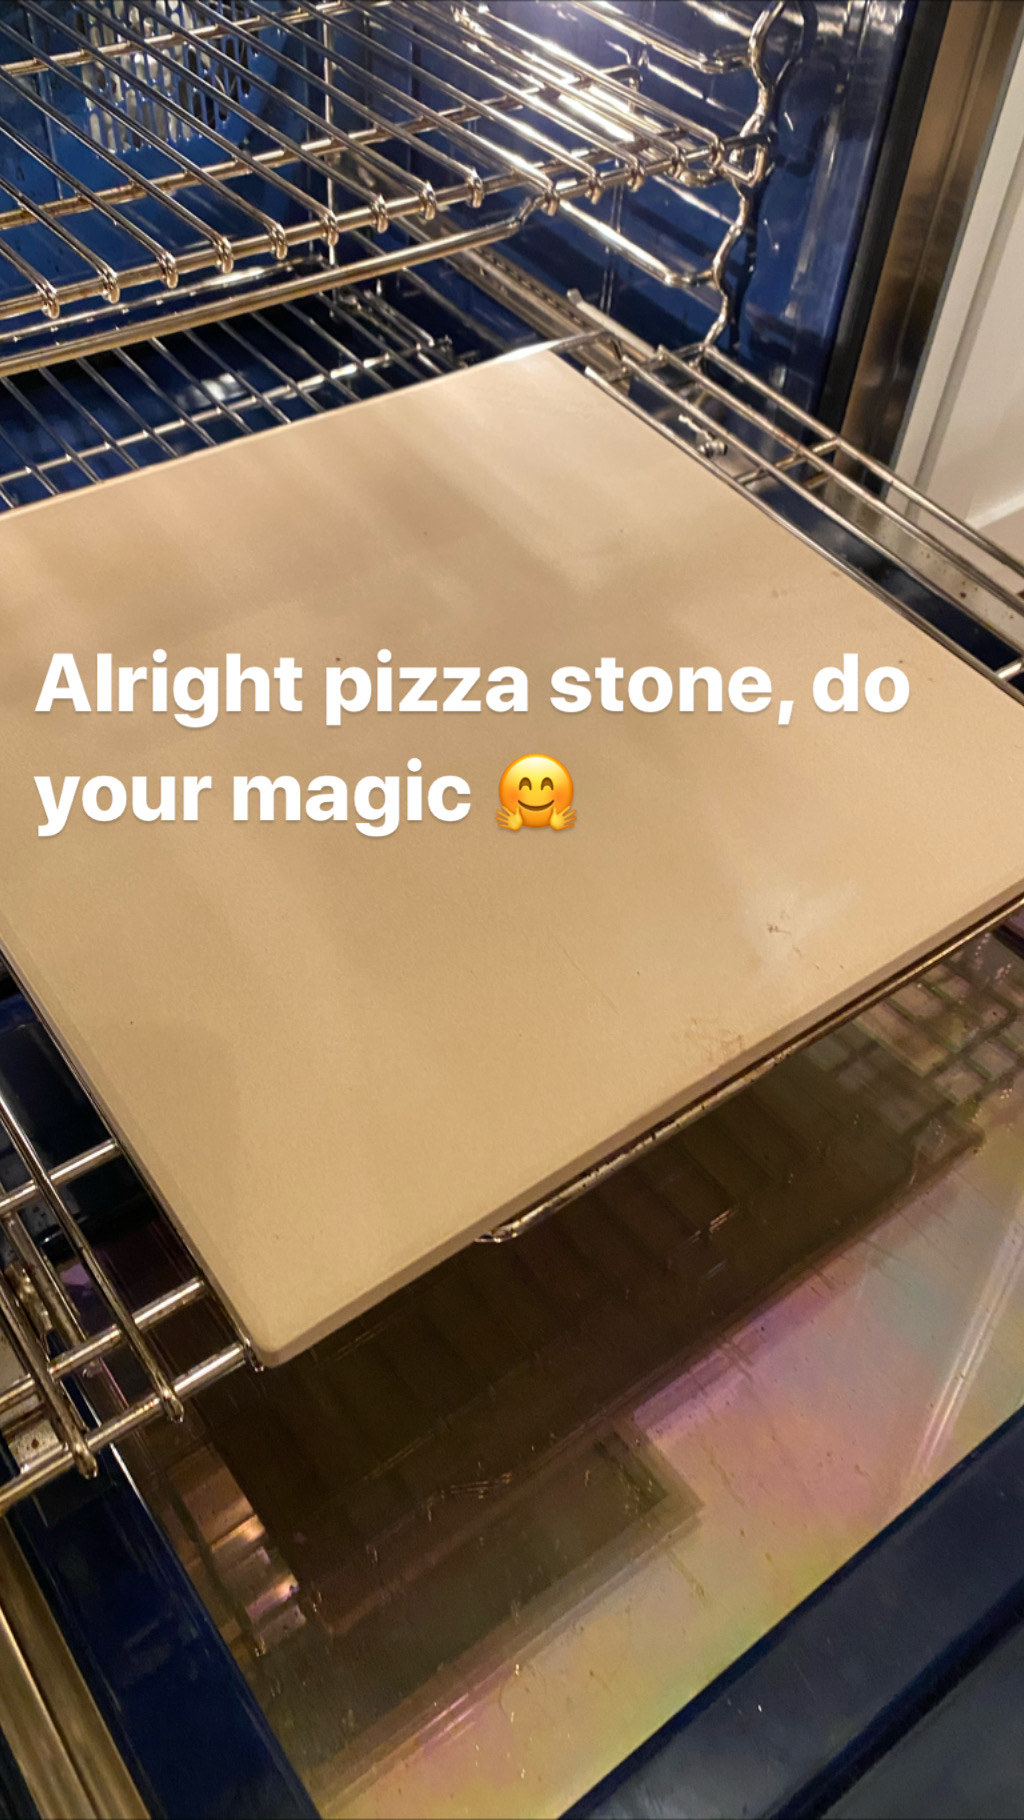 My brand new pizza stone, preheating in the oven.